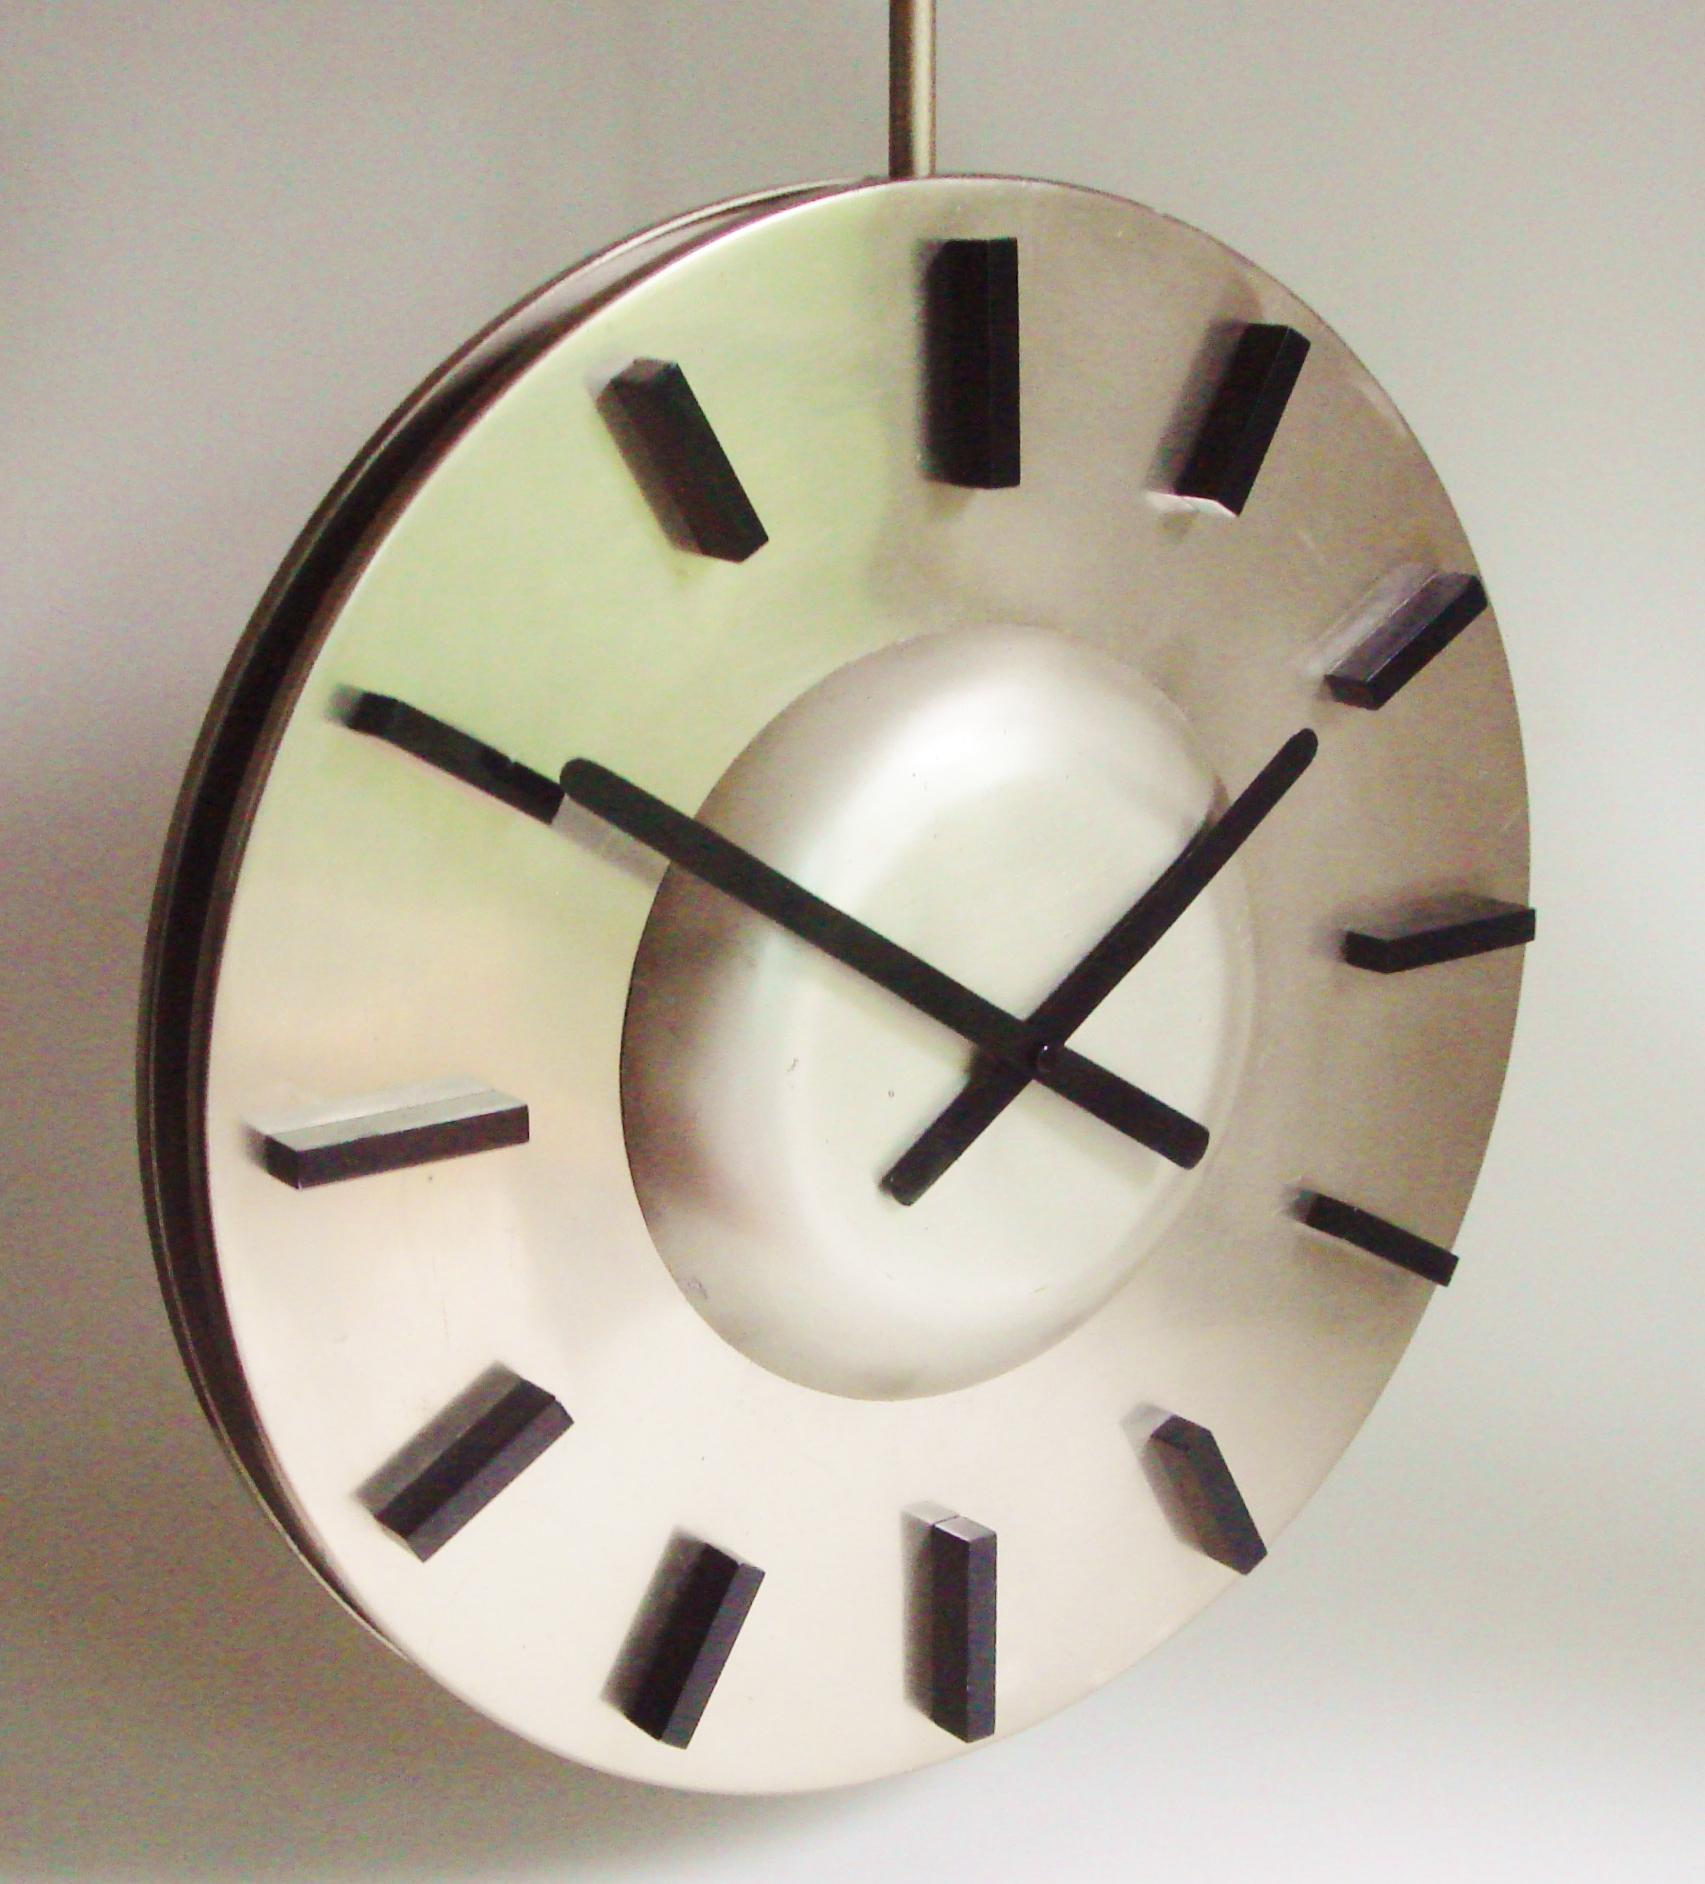 This large and very graphically designed German, Space Age, twin-faced and ceiling mounted clock is one very strong example of midcentury design. The numerals and hands are in black anodized aluminium while the two faces of the clock are in two